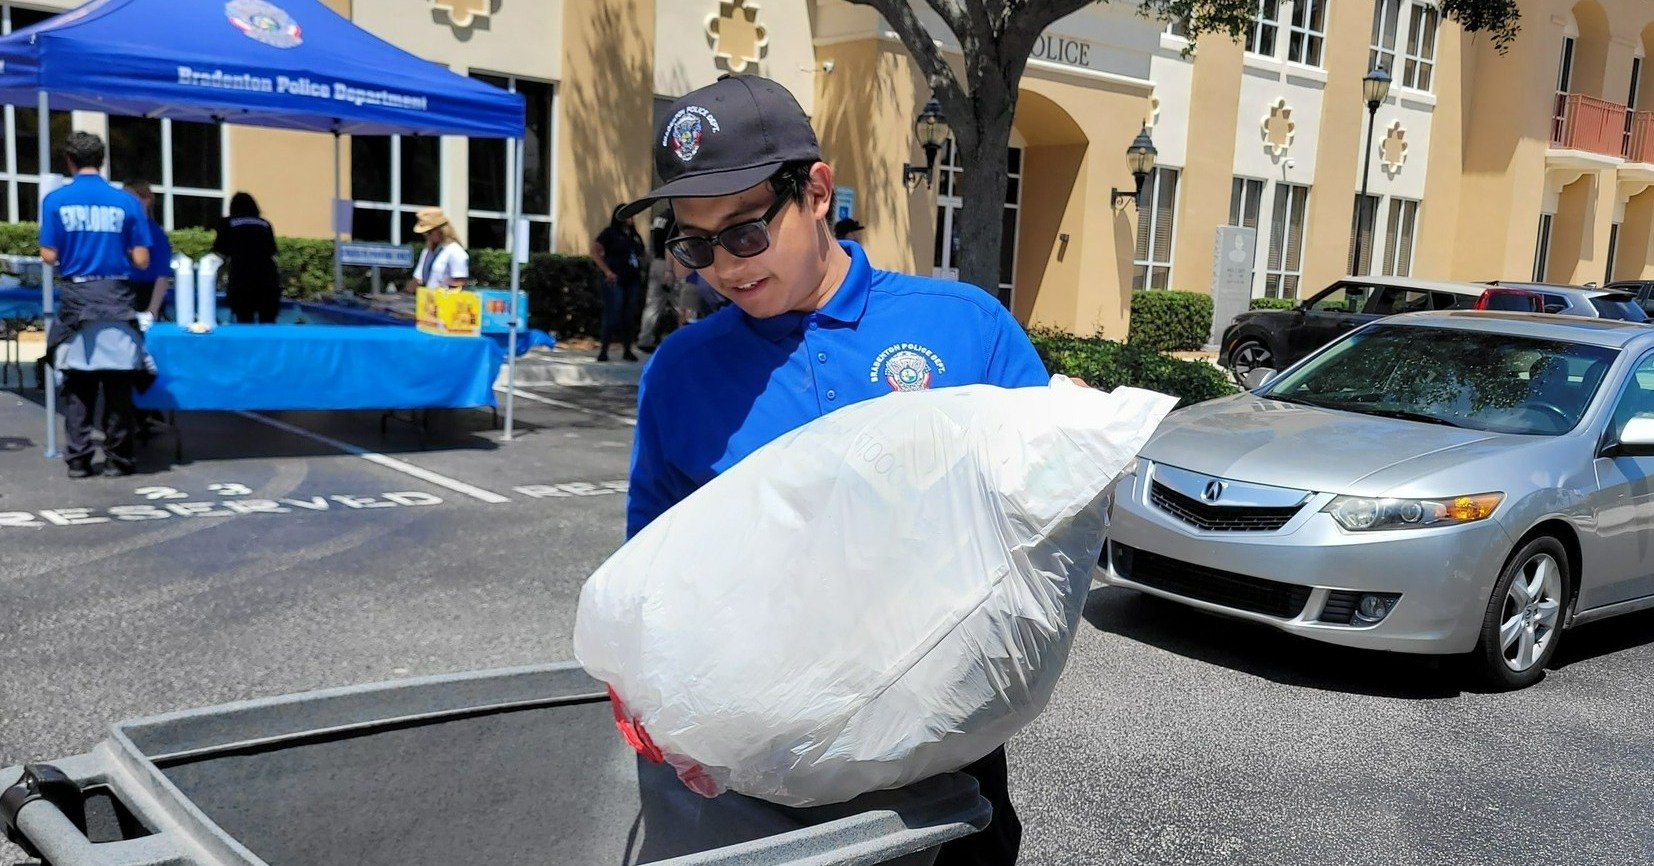 ❗️ FREE DOCUMENT SHREDDING ON SATURDAY ❗️
Nearly 94,000 Floridians were victims of identity theft in 2023. One of the simplest things you can do to protect against ID theft is to shred pre-approved credit applications, credit card receipts, bills, an